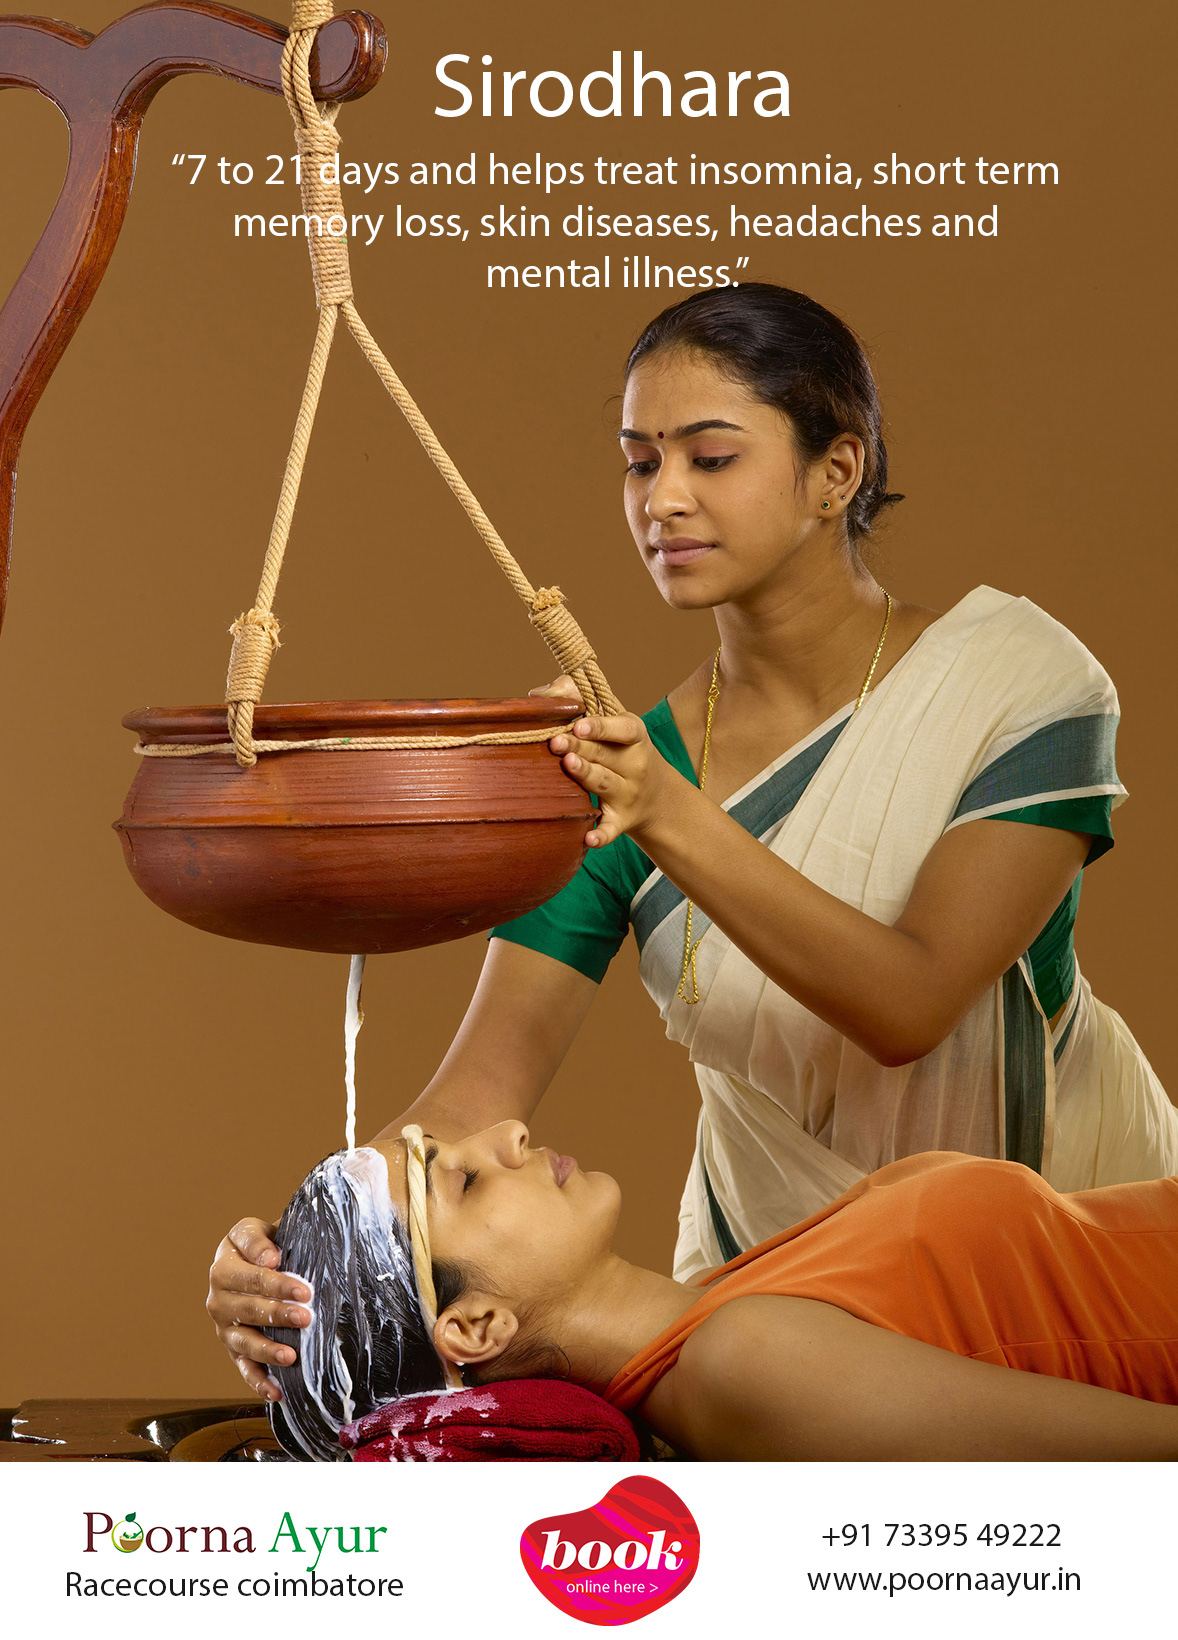 Poornaayur is the best Ayurveda Treatment Center in Coimbatore Ayurvedic therapies for back pain weight loss Rejuvenation arthritis Spondylitis